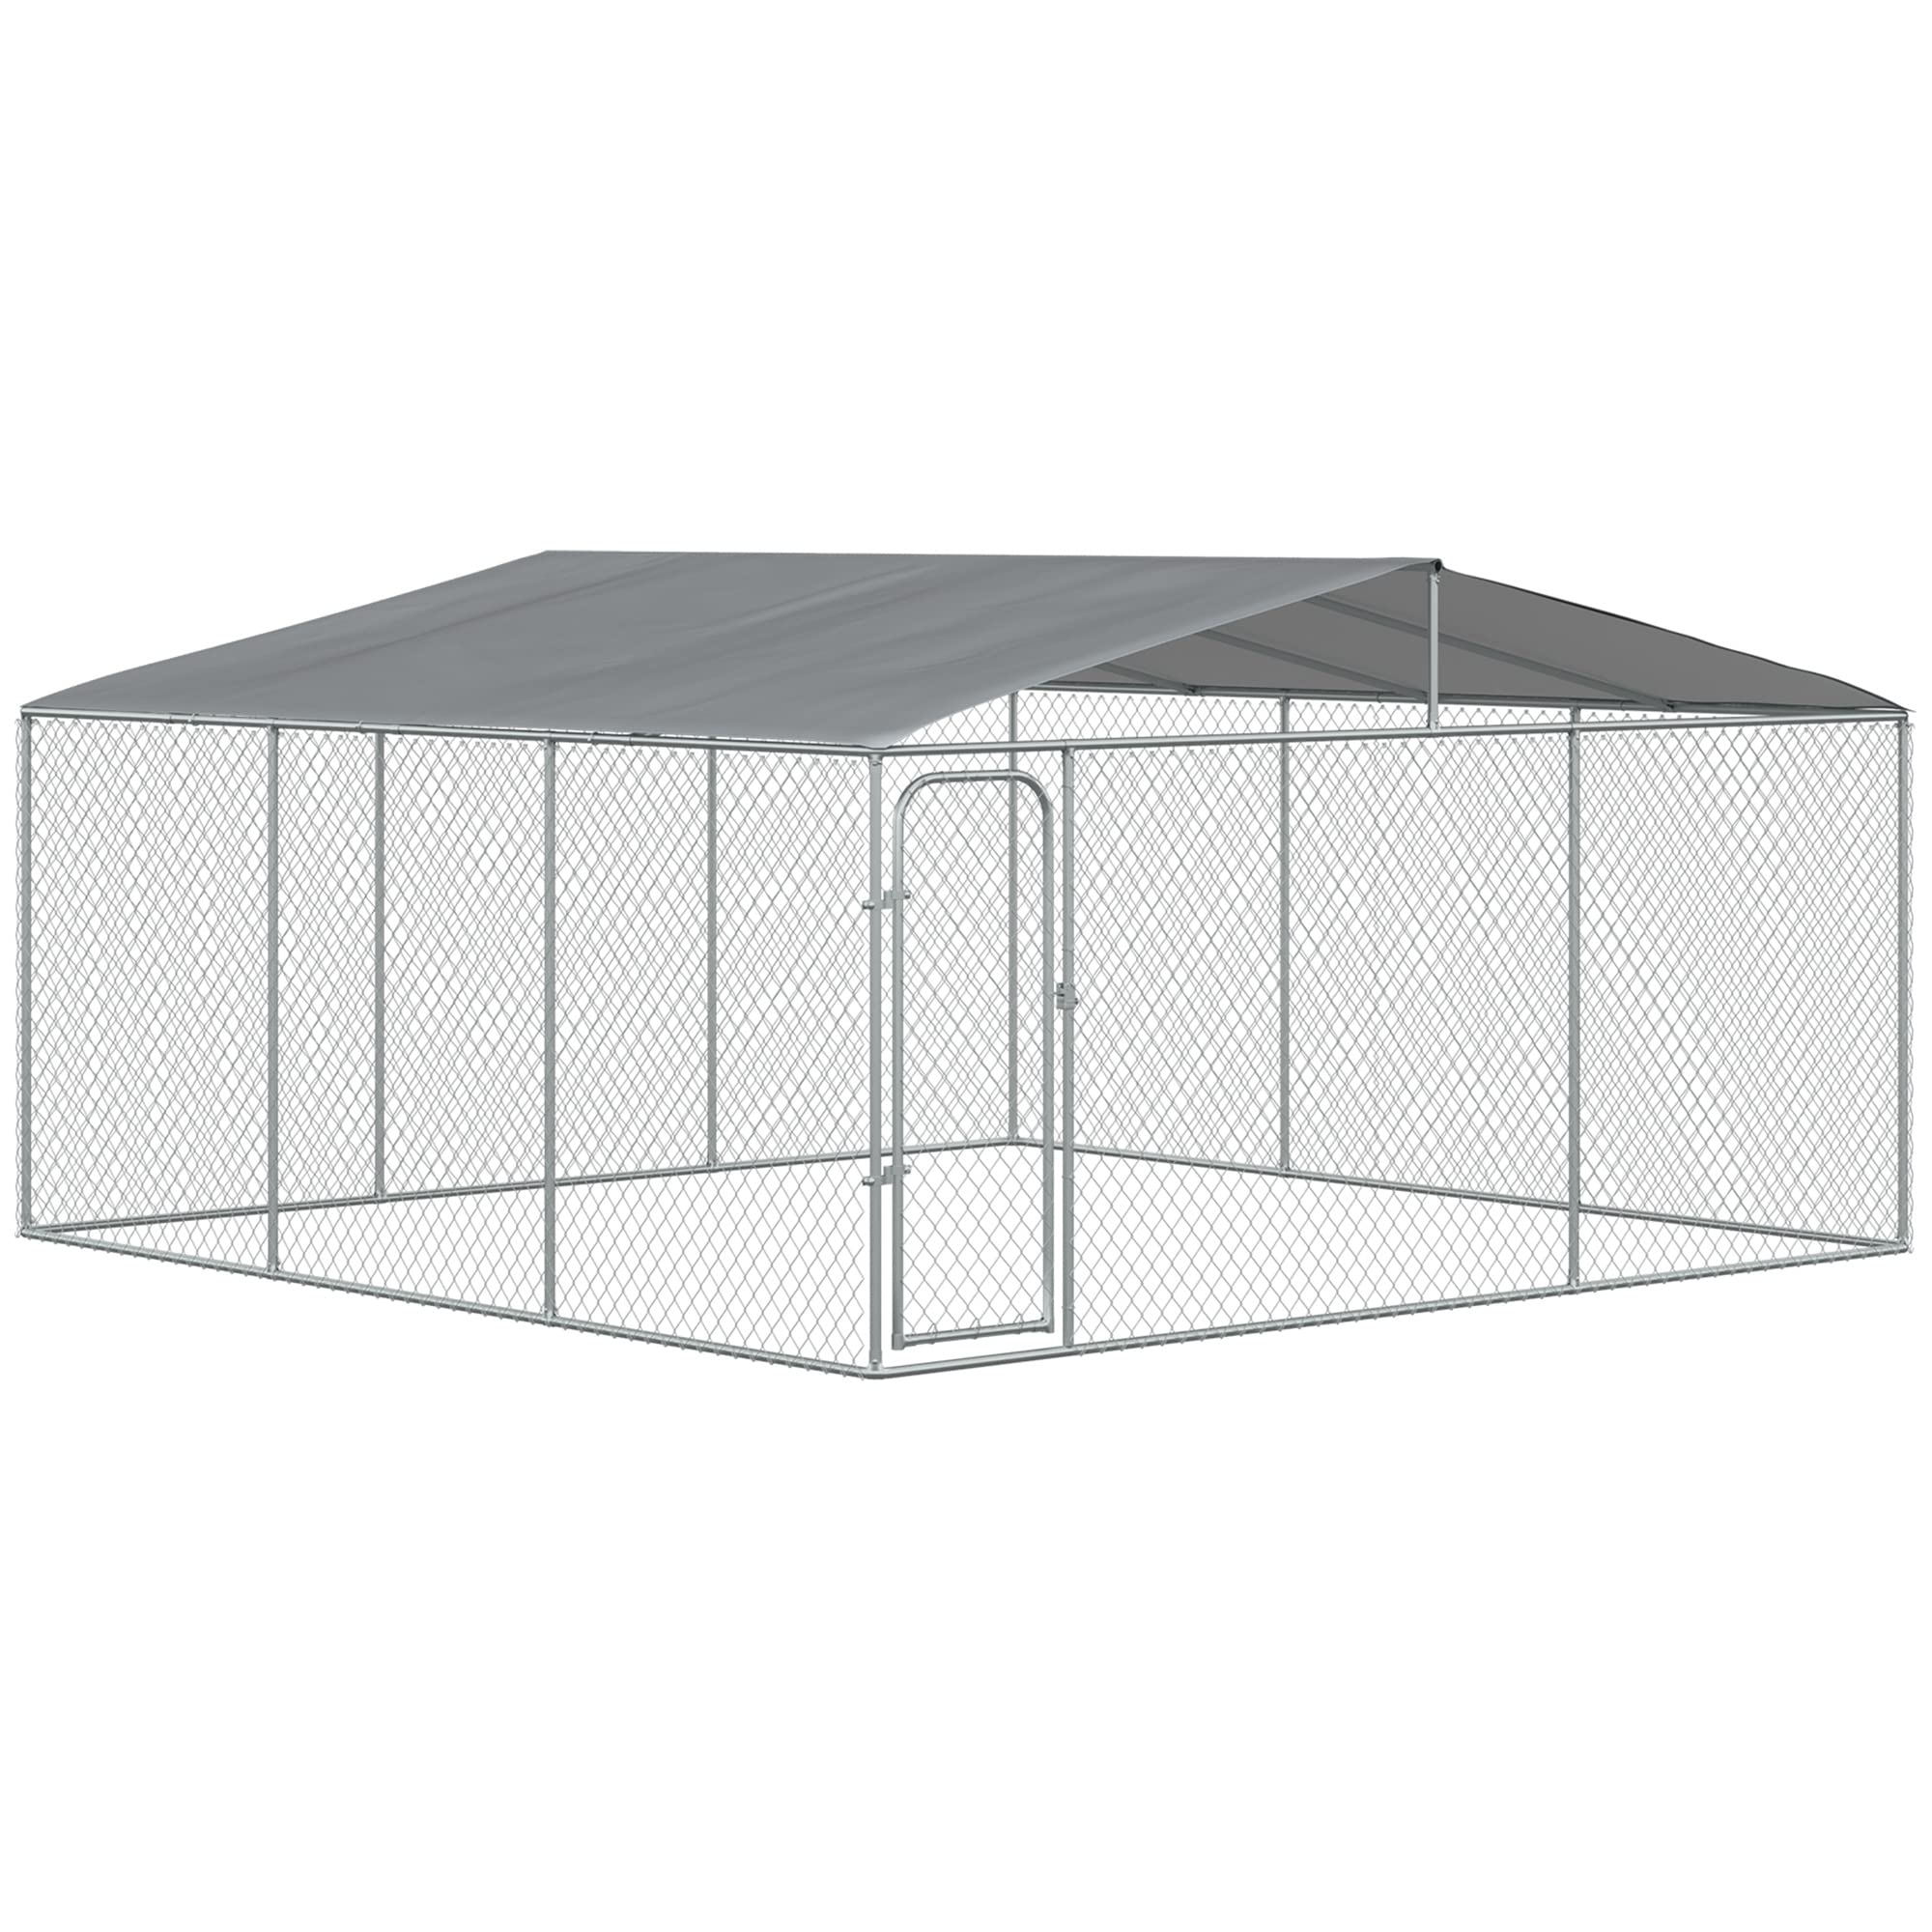 PawHut Dog Kennel Outdoor with Waterproof Canopy, Dog Run with Galvanized Chain Link, Secure Lock, for Backyard and Patio, 15' x